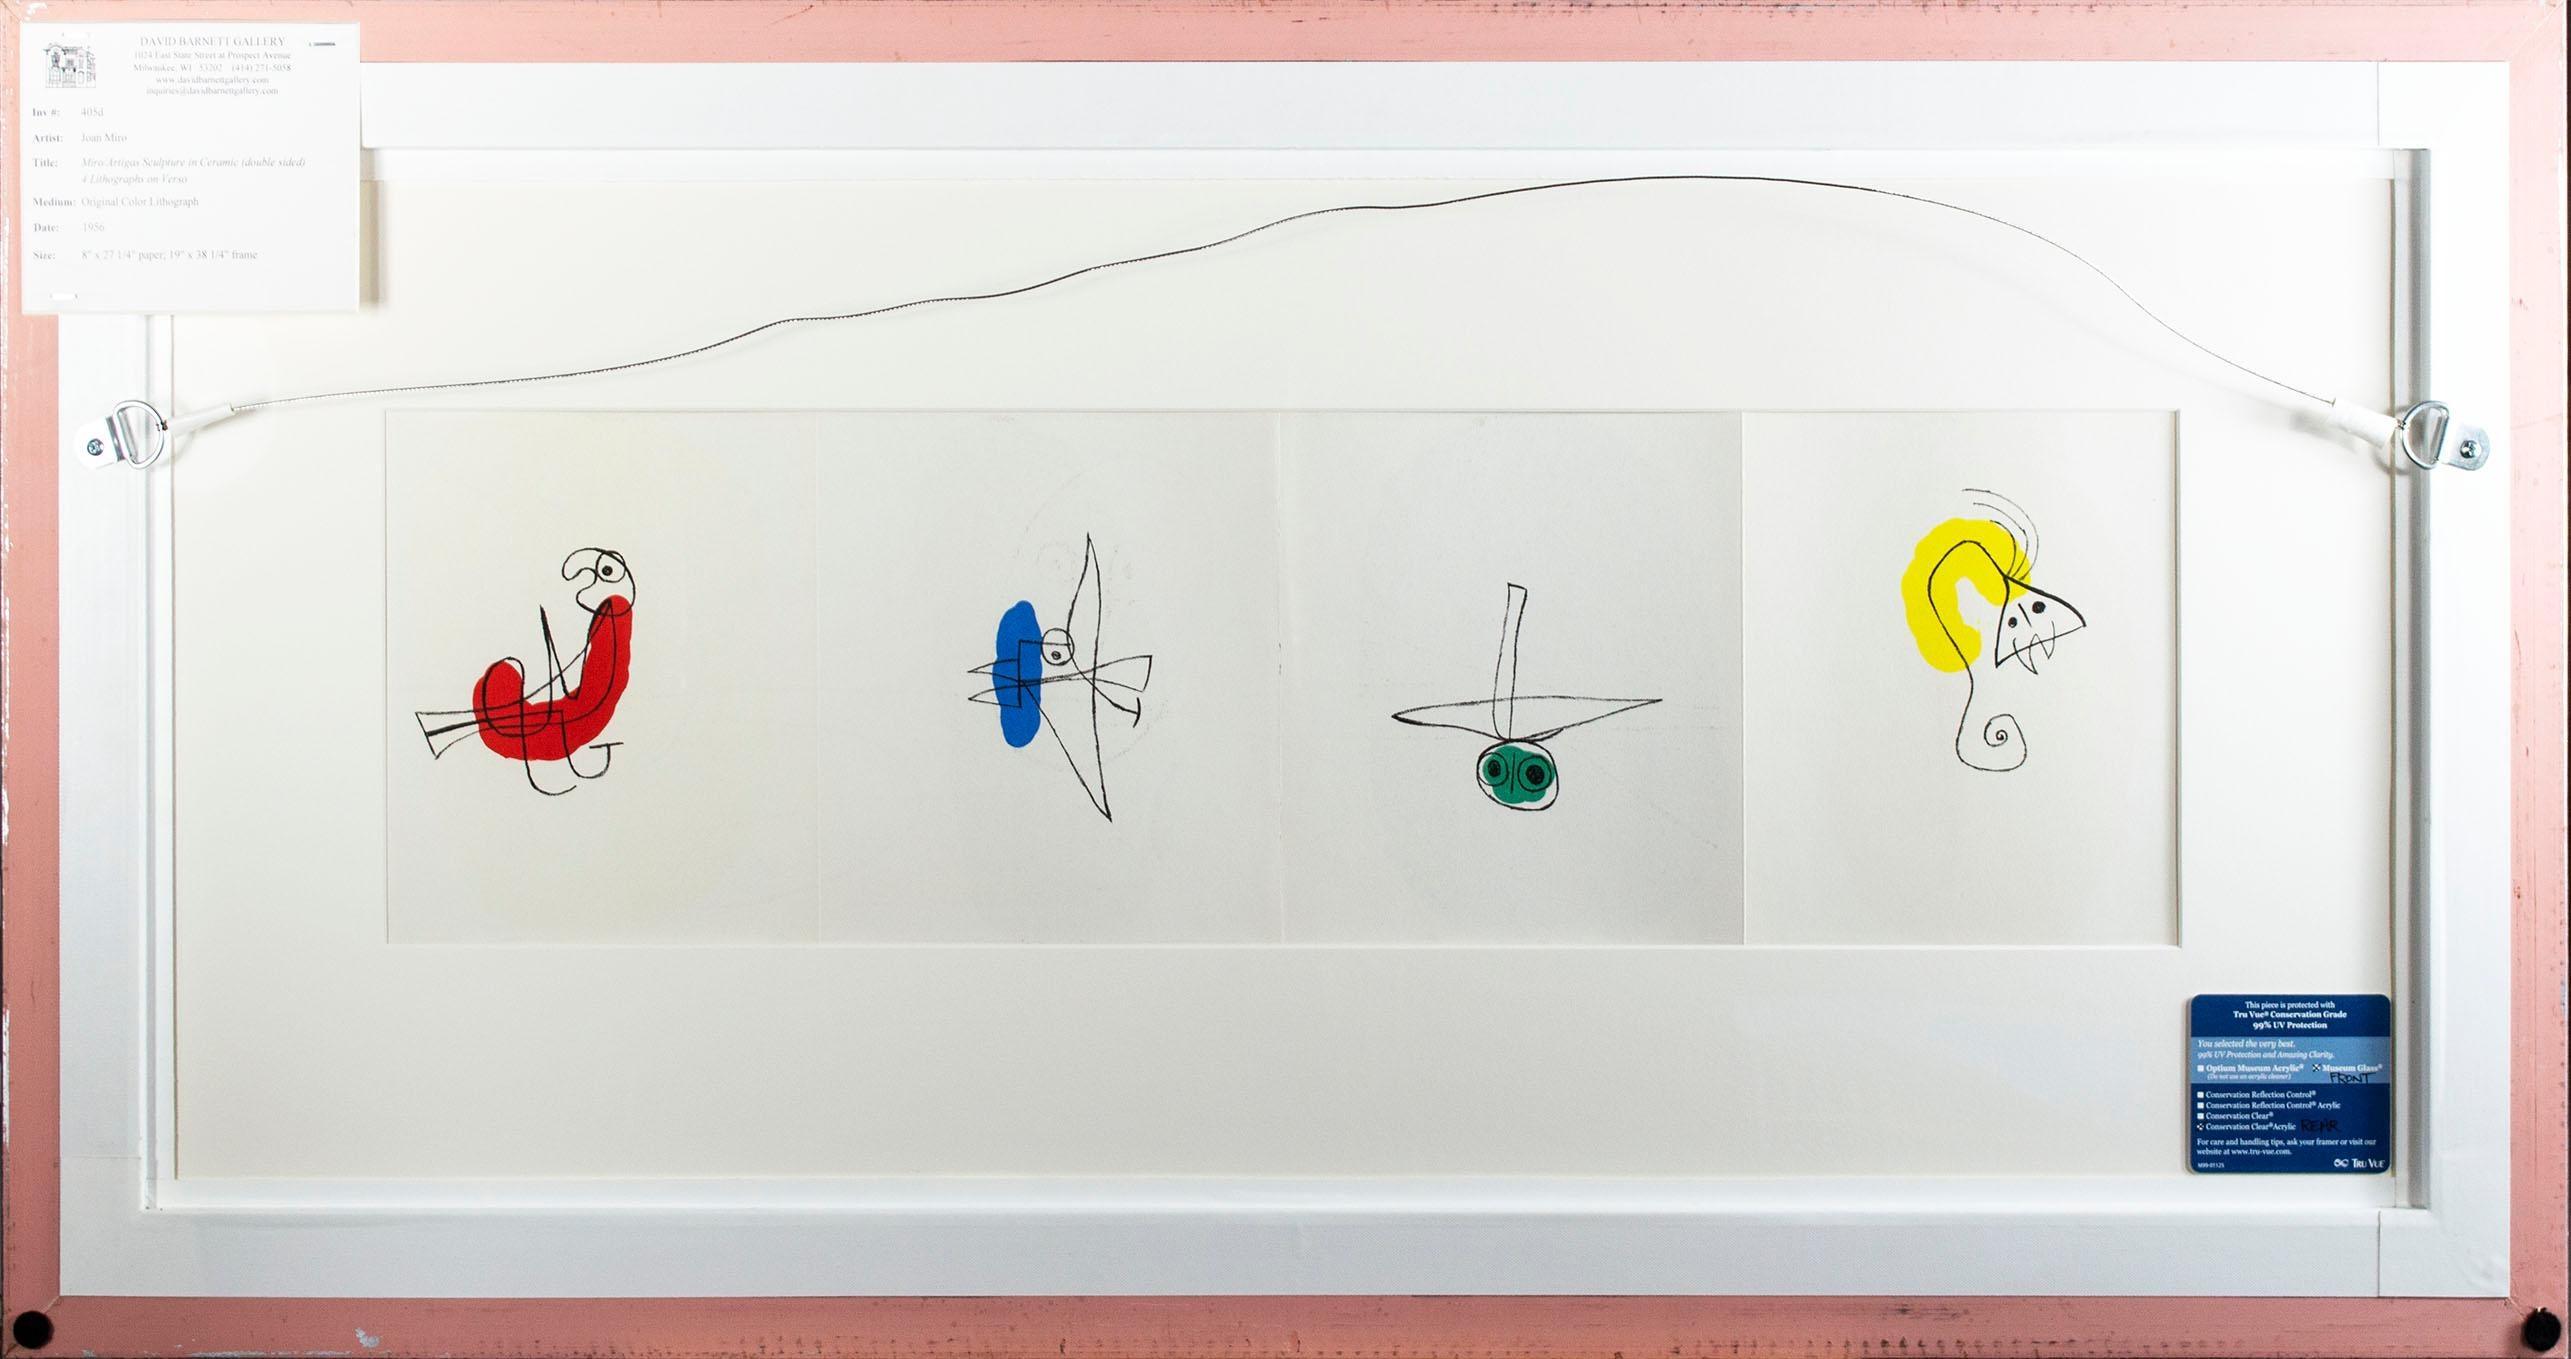 Joan Miró produced this original  lithograph especially for the catalogue for an exhibition of his and Josep Llorens Artigas' collaborative work at the Pierre Matisse Gallery, New York. It is an excellent example of his mid-century work and features